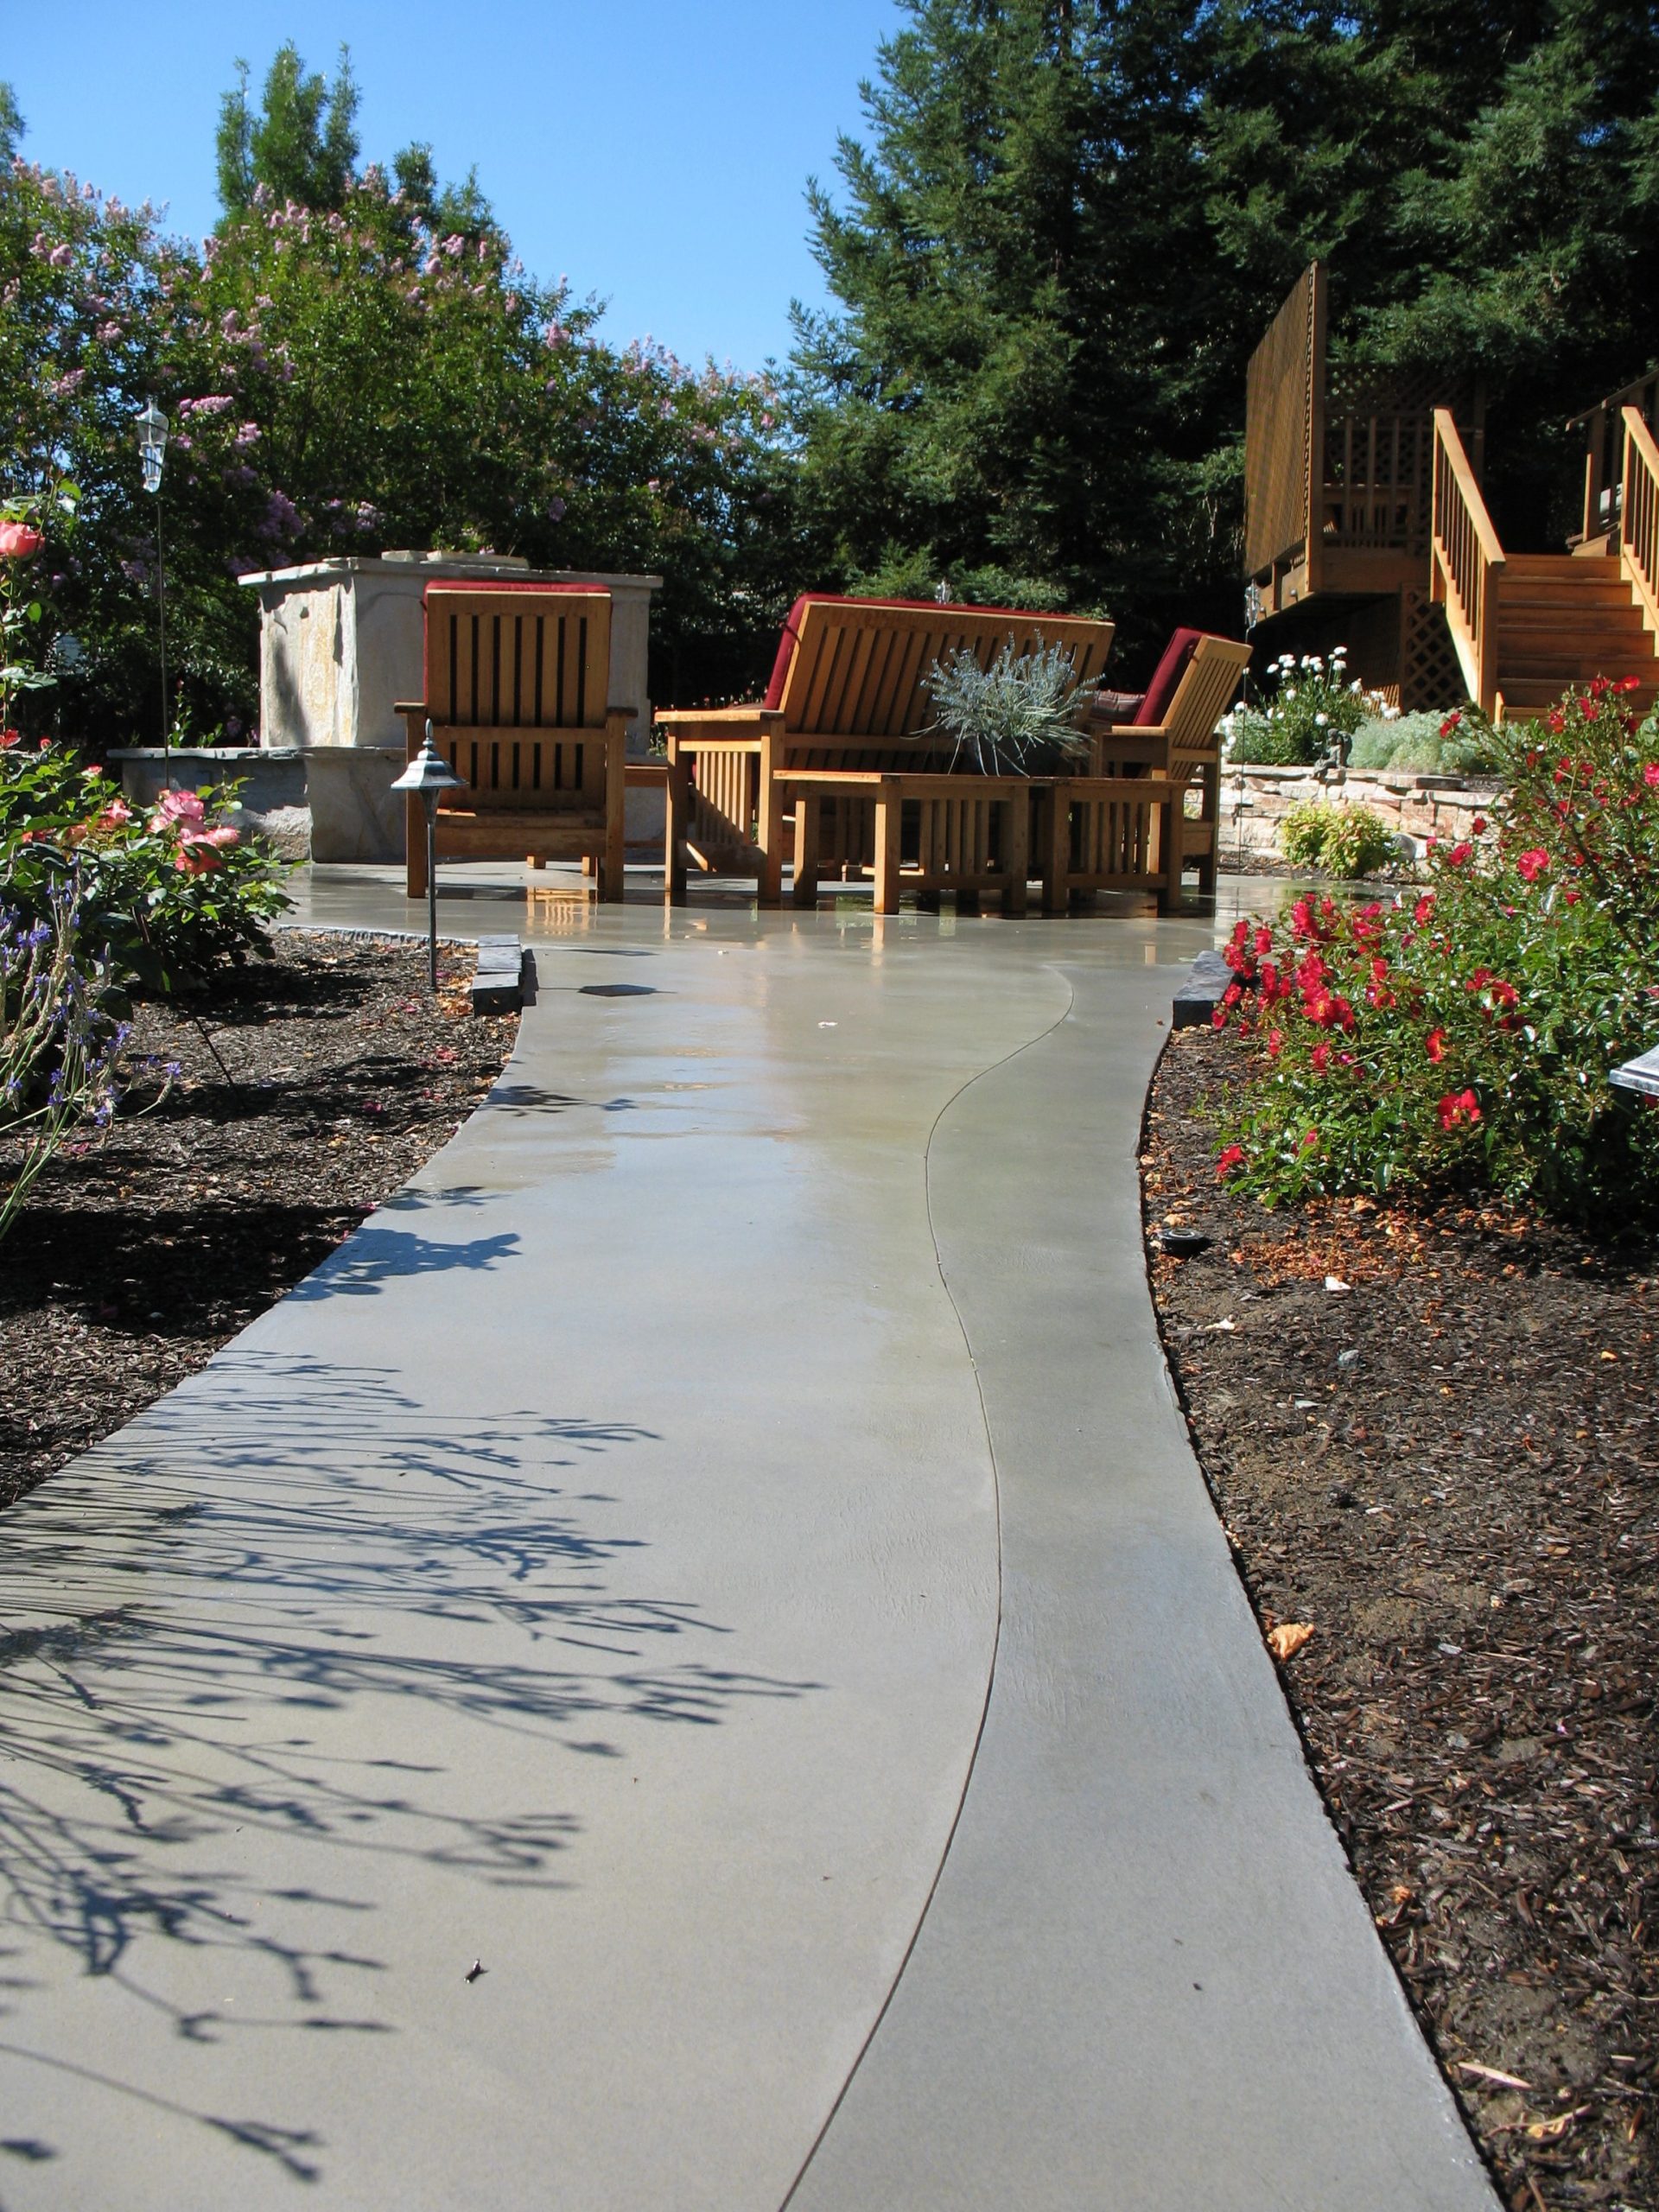 Staining outdoor concrete surfaces like patios and driveways | Duraamen Engineered Products Inc